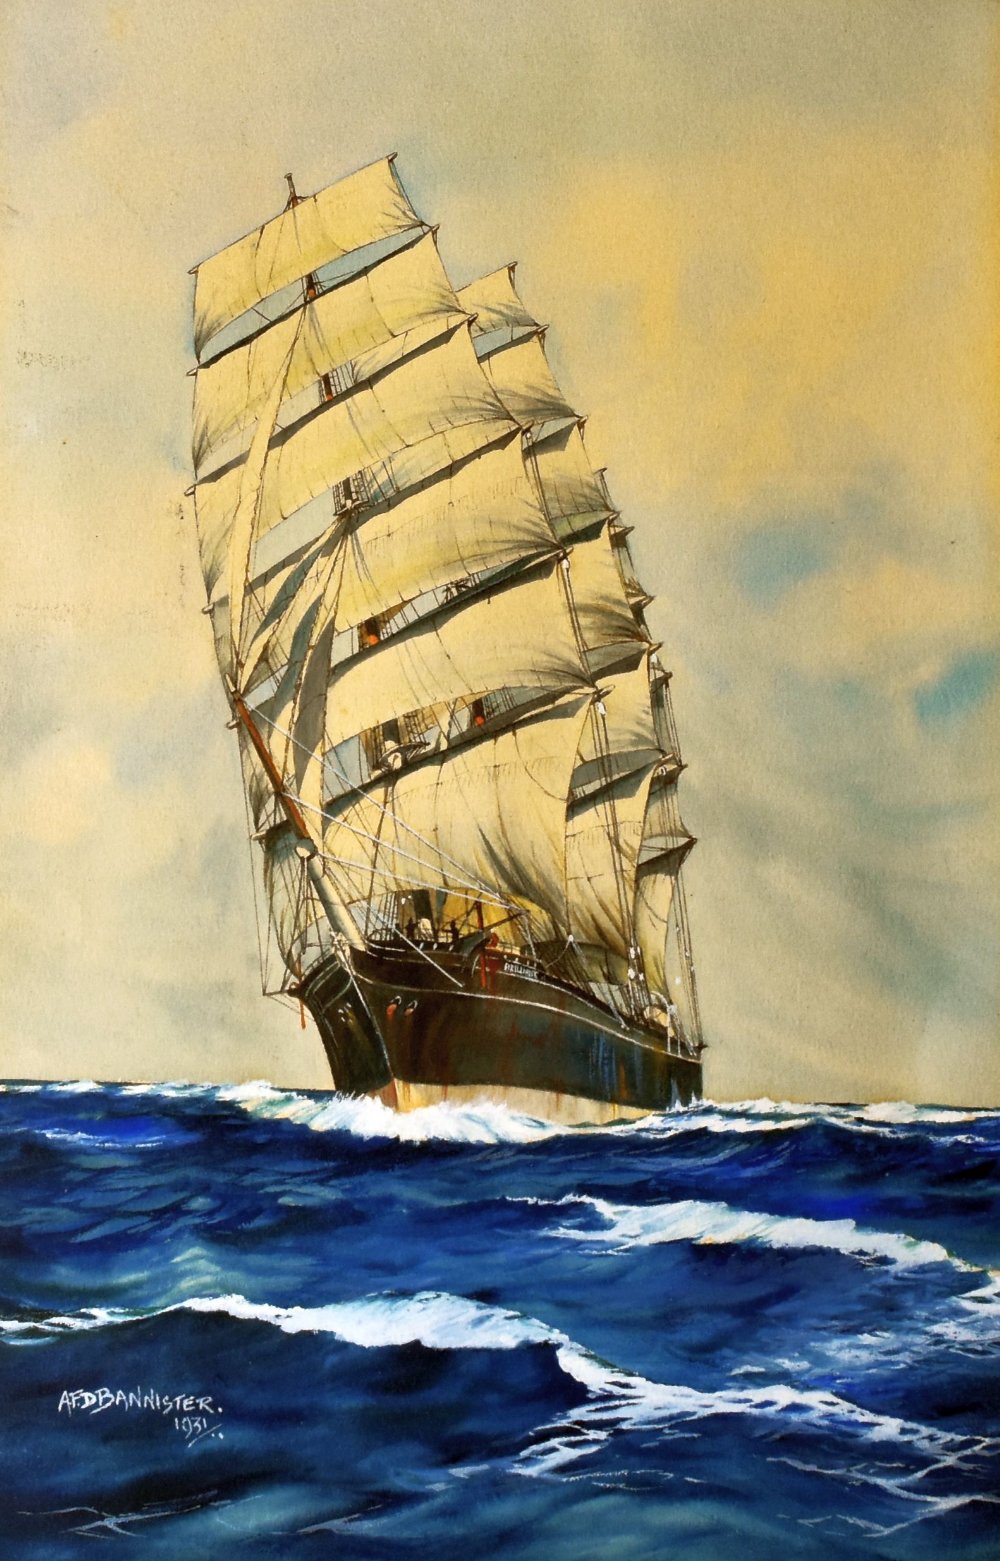 A F D BANNISTER watercolour - portrait of a tall-ship 'Brilliant', signed and dated 1931, 40 x